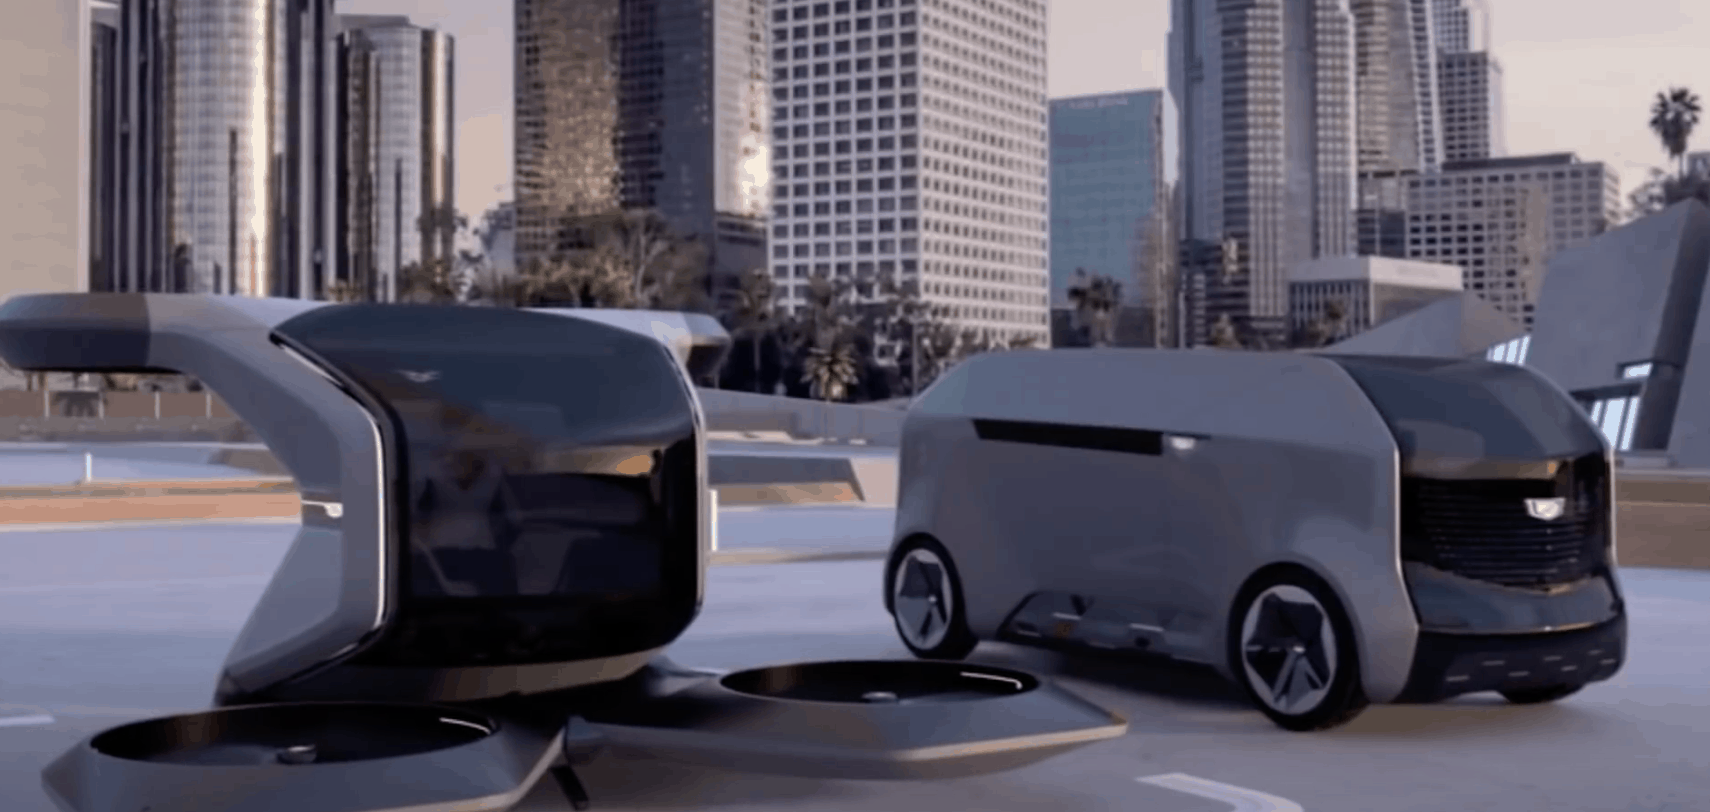 GM electric vehicles of the future